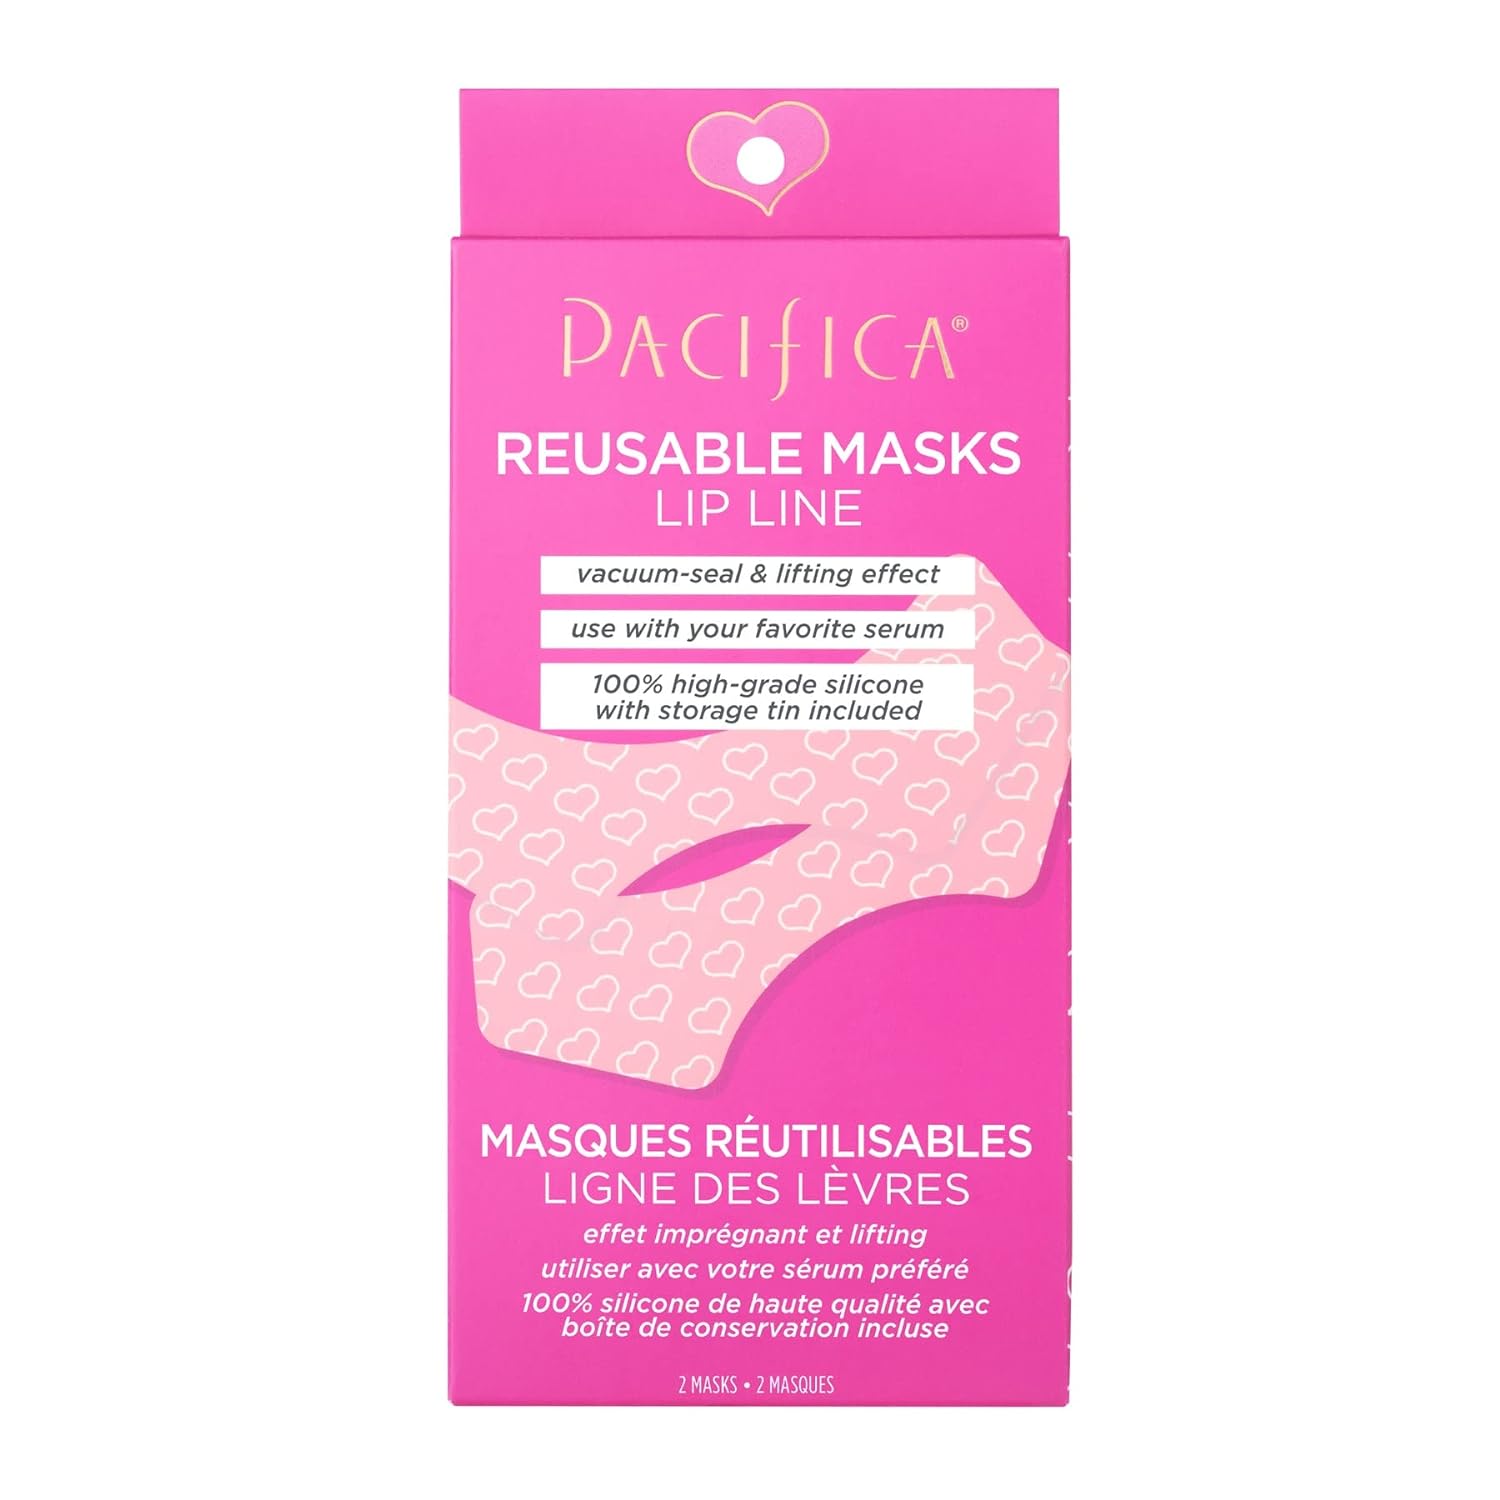 Pacifica Beauty | Reusable Lip Line Mask | 100% Silicone | Vacuum Seal & Lifting Effect | Minimize Fine Lines + Wrinkles | Pair with Serum | Storage Tin Included | Vegan + Cruelty Free